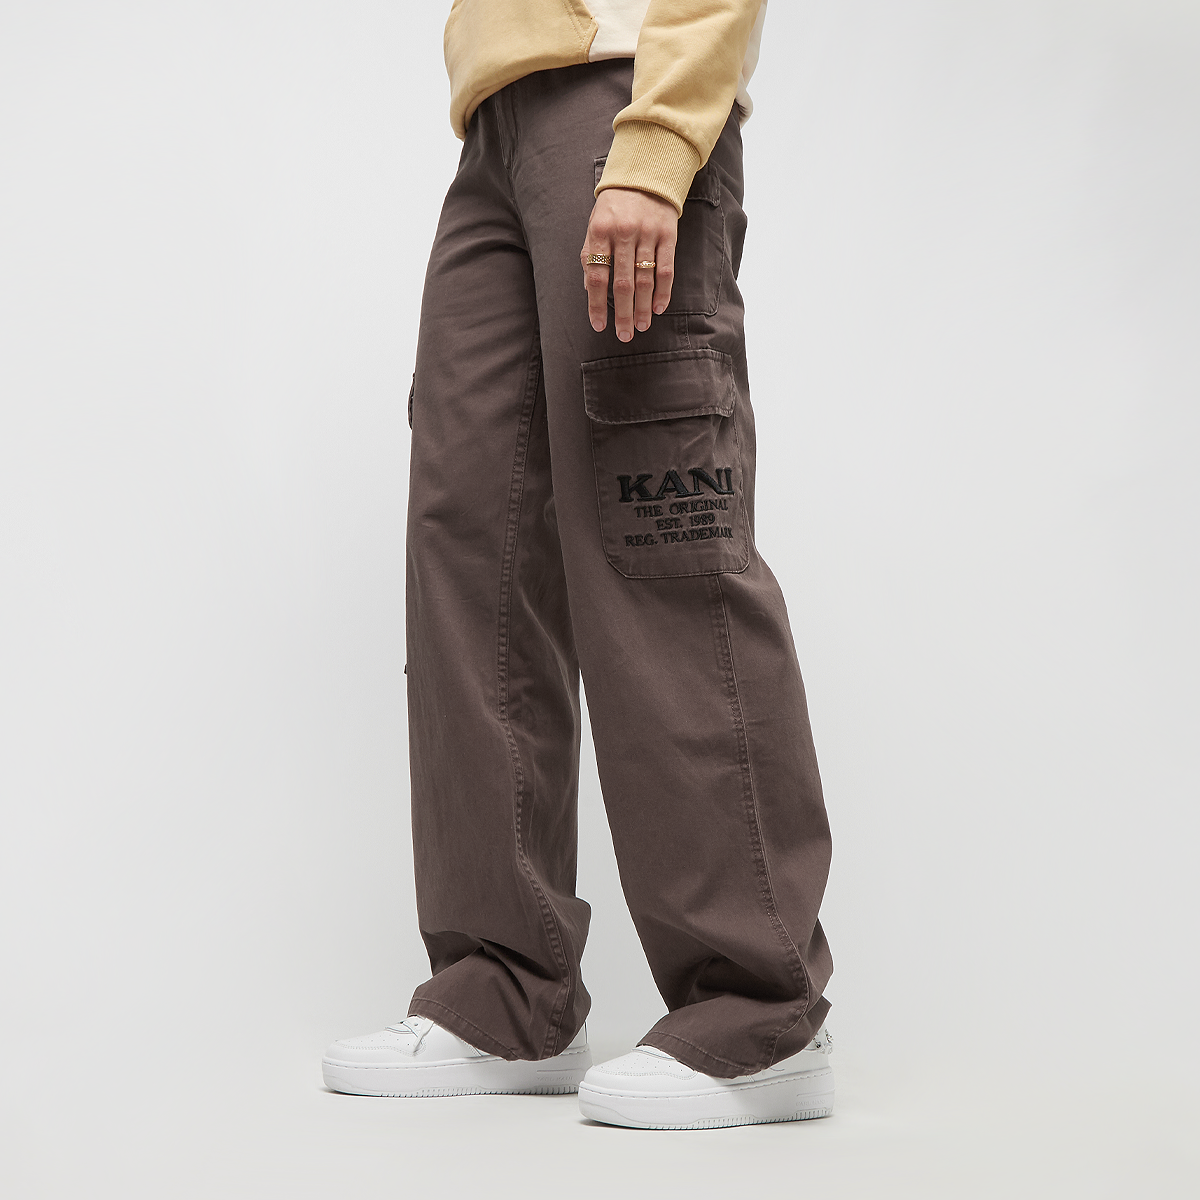 karl kani retro washed cargo pants, pantalons cargo, vêtements, brown, taille: s, tailles disponibles:xs